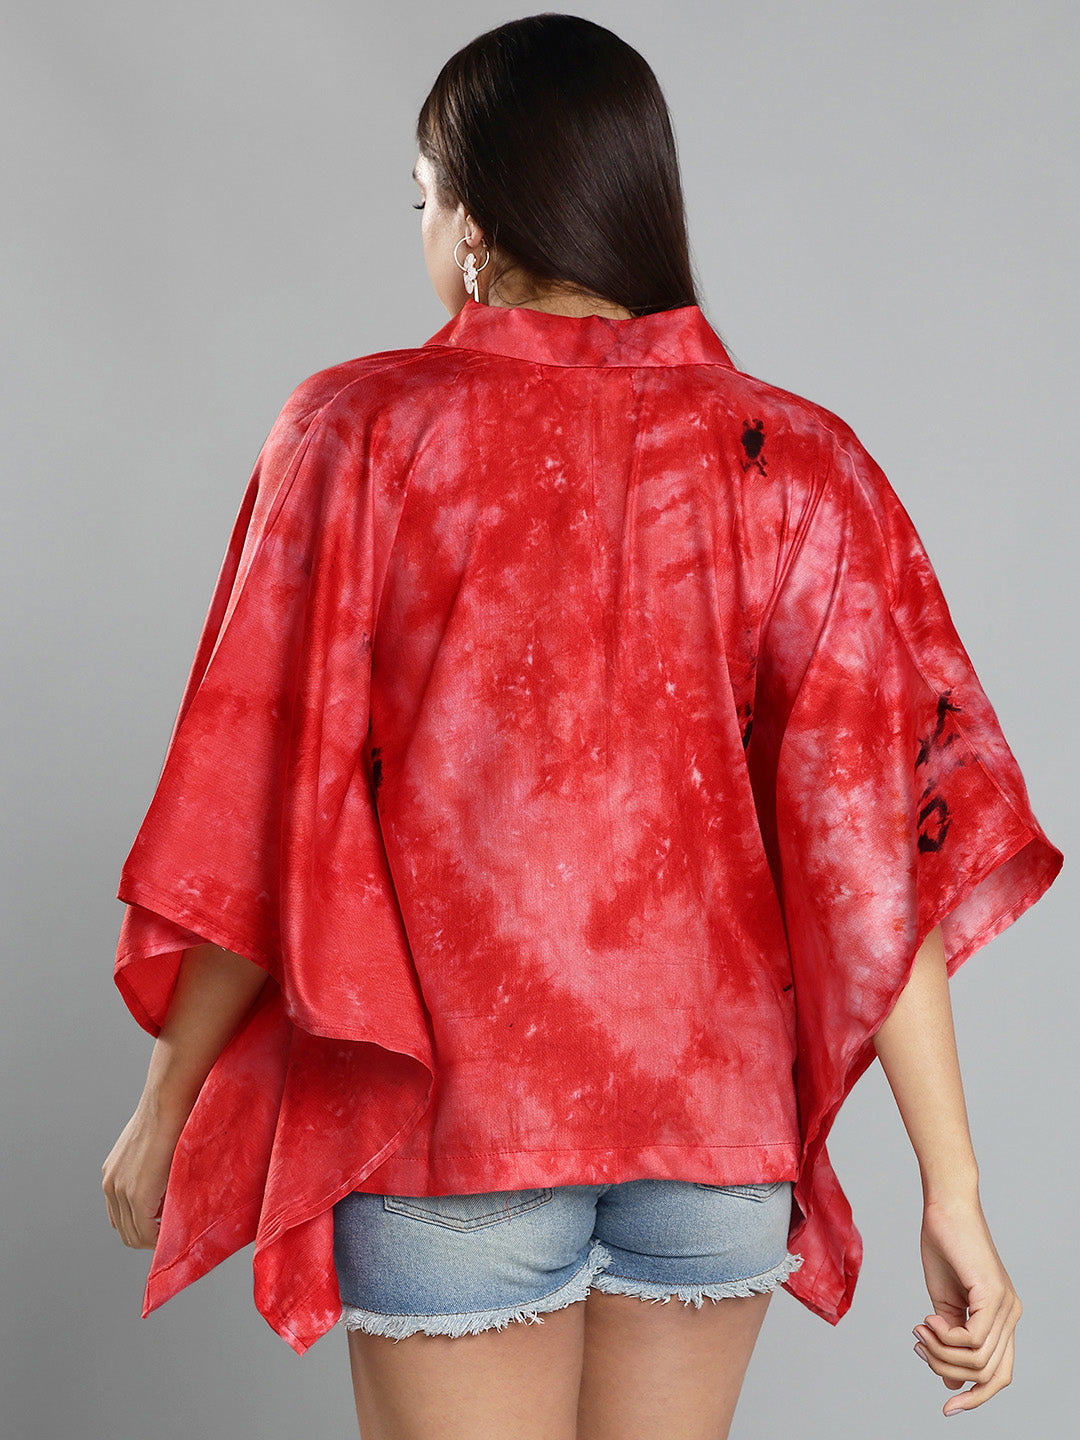 Red Rayon TieDyeTop- Luminescent